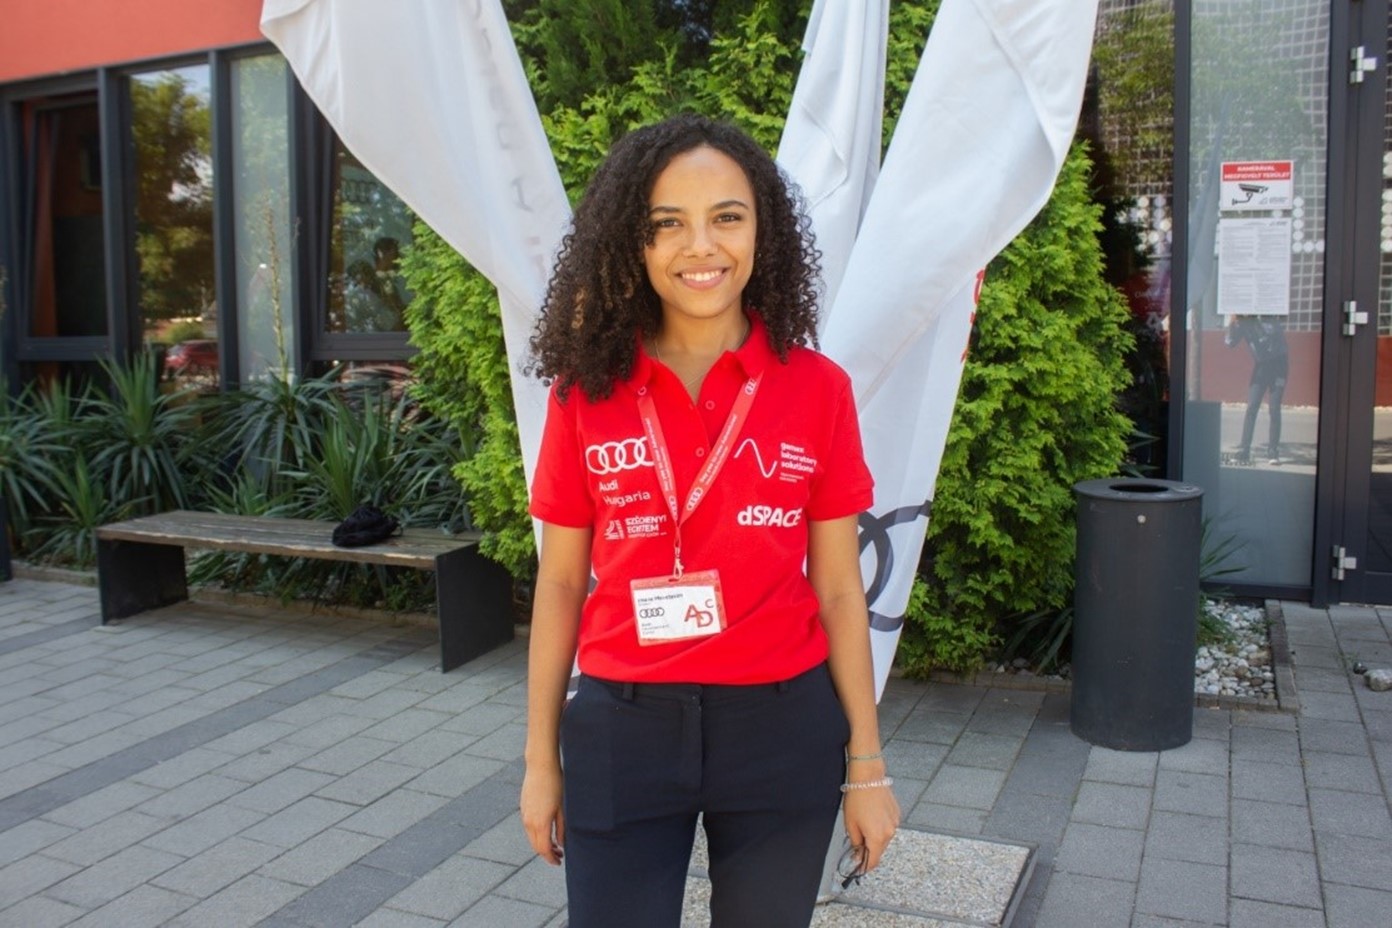 Imane Moustakim is looking forward to working with the other students